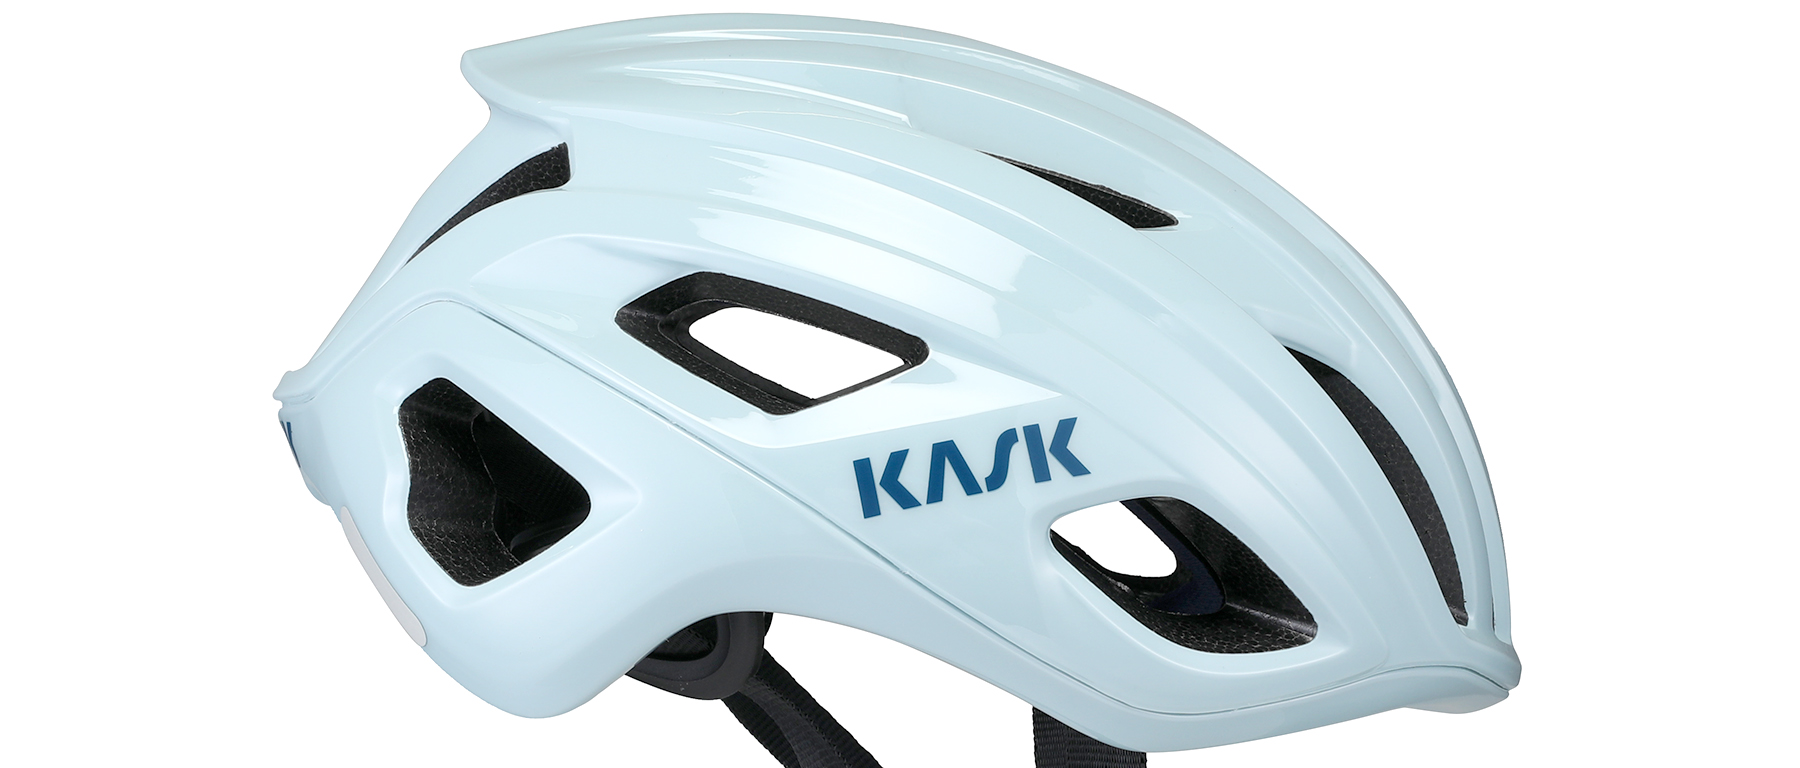 KASK Mojito 3 Excel Sports | Shop Online From Boulder Colorado